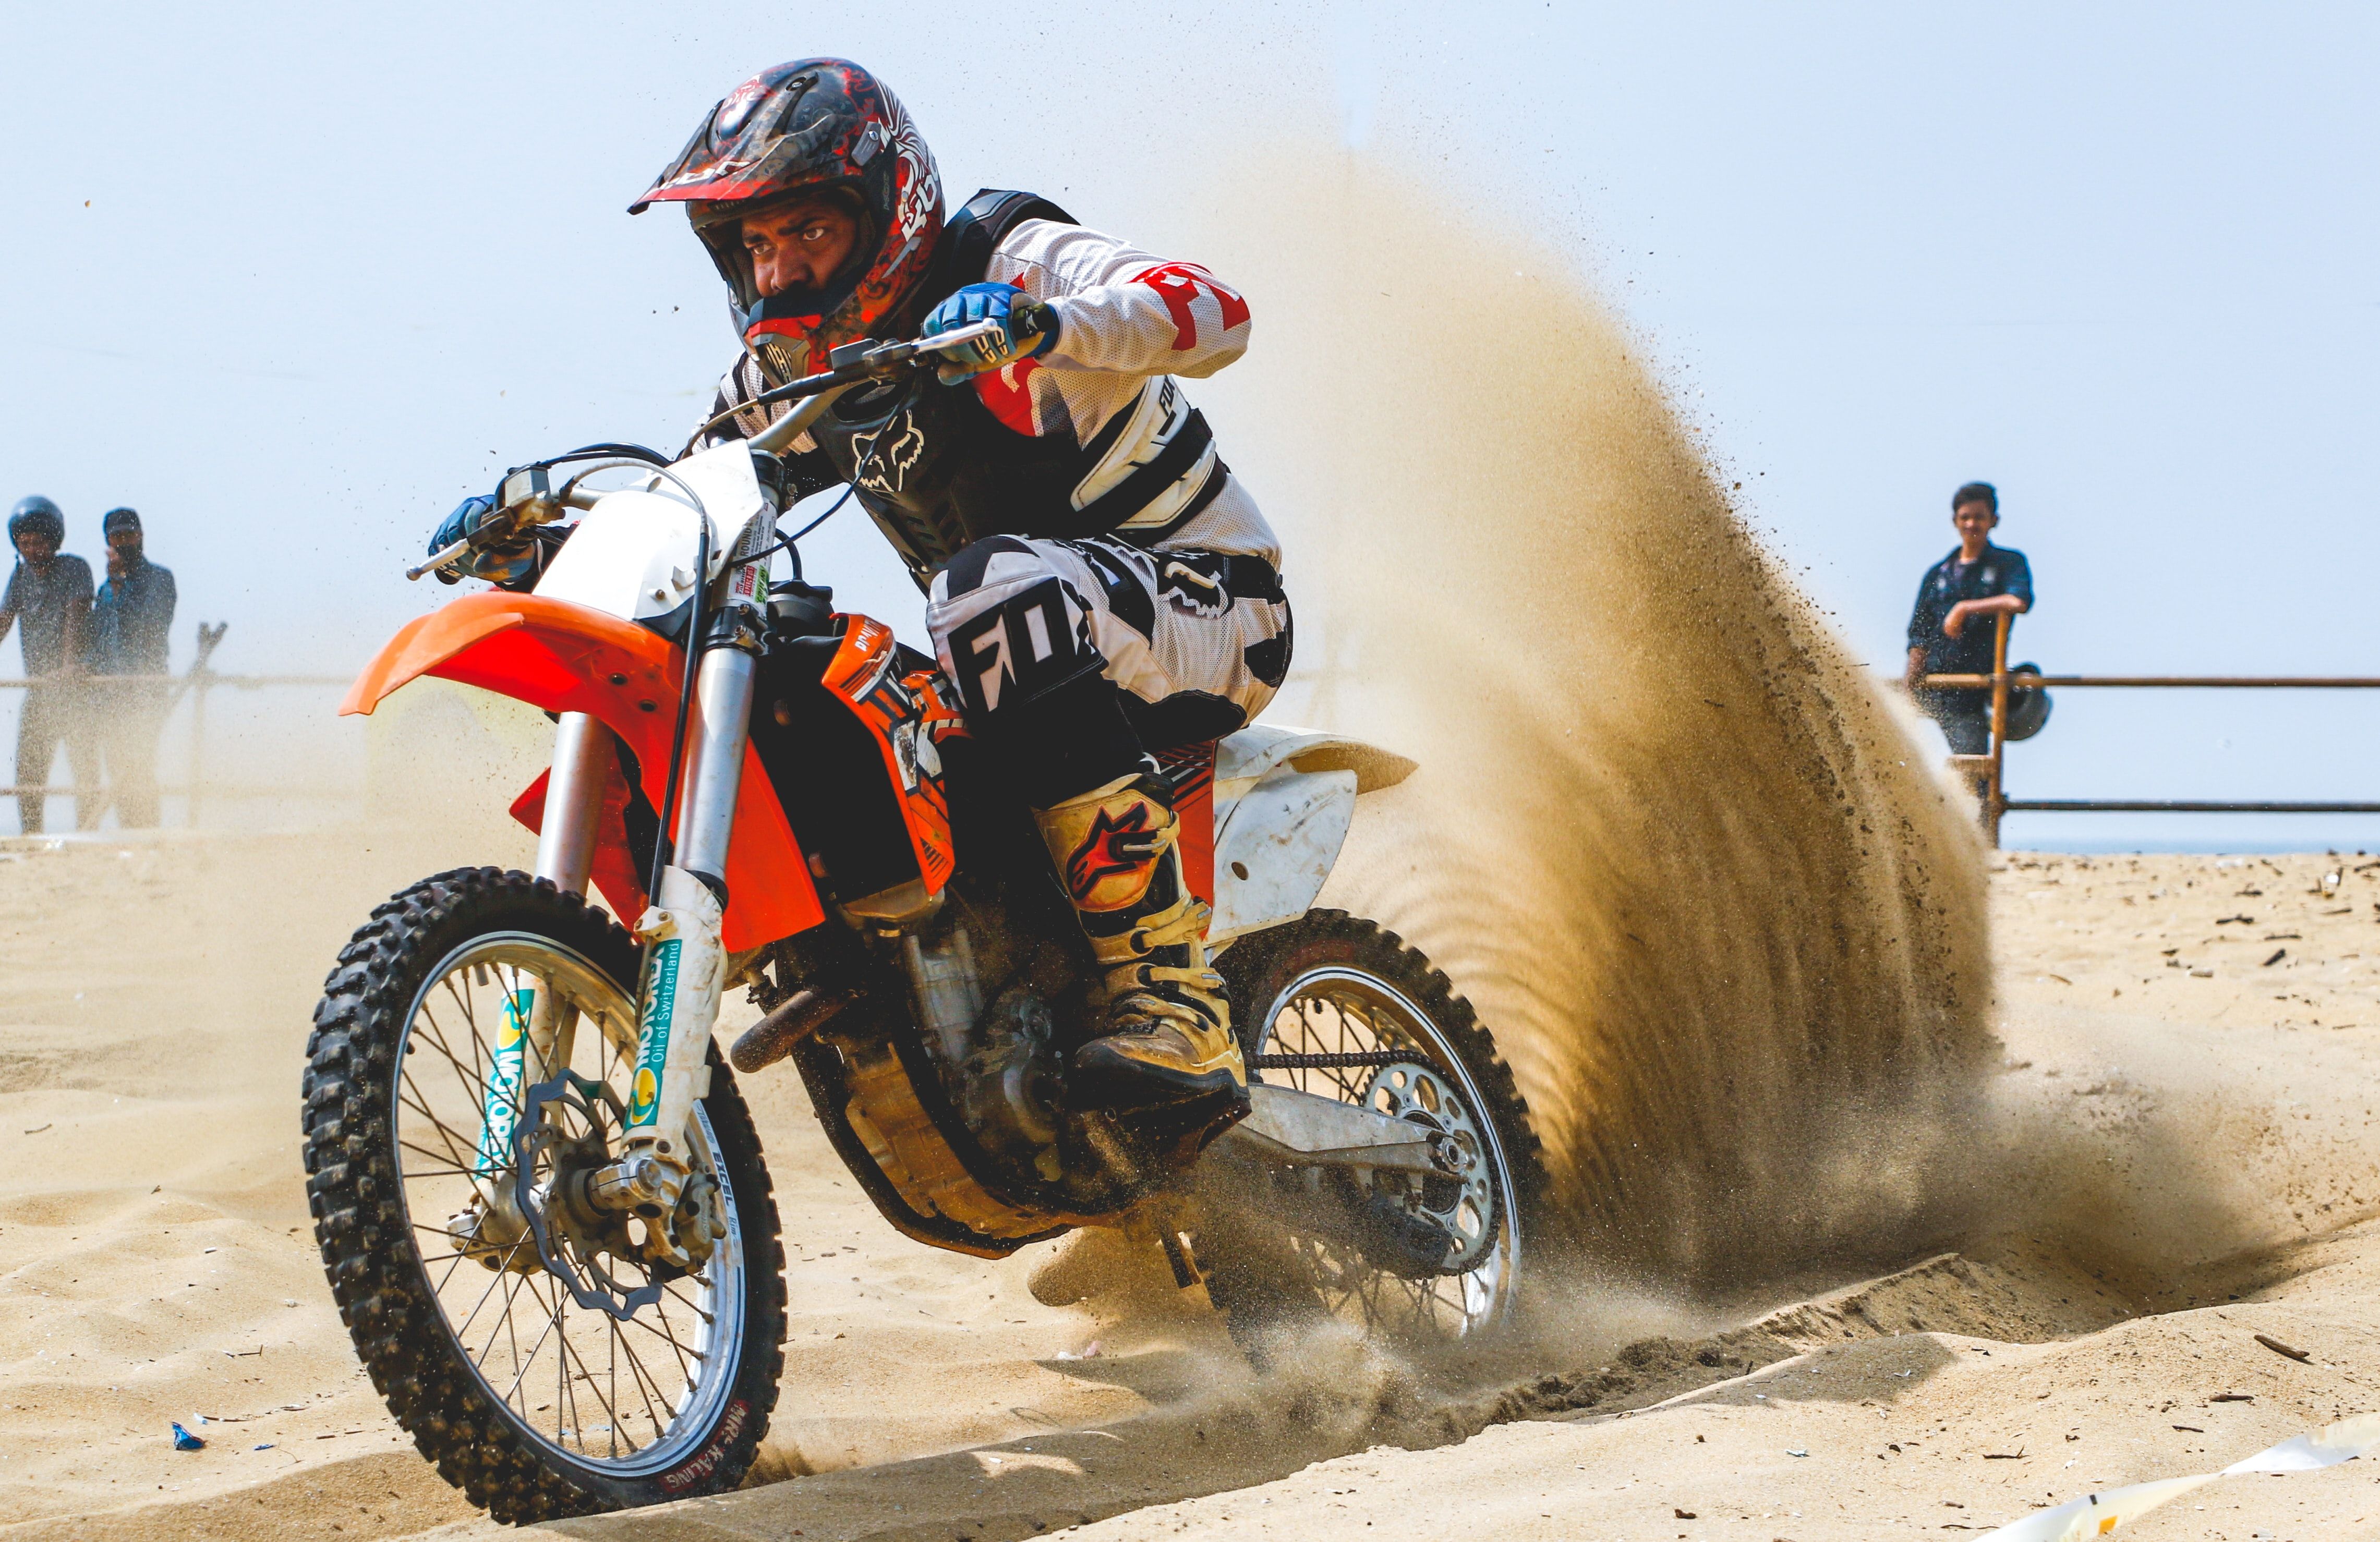 Man riding KTM dual sport motorcycle in sand. 